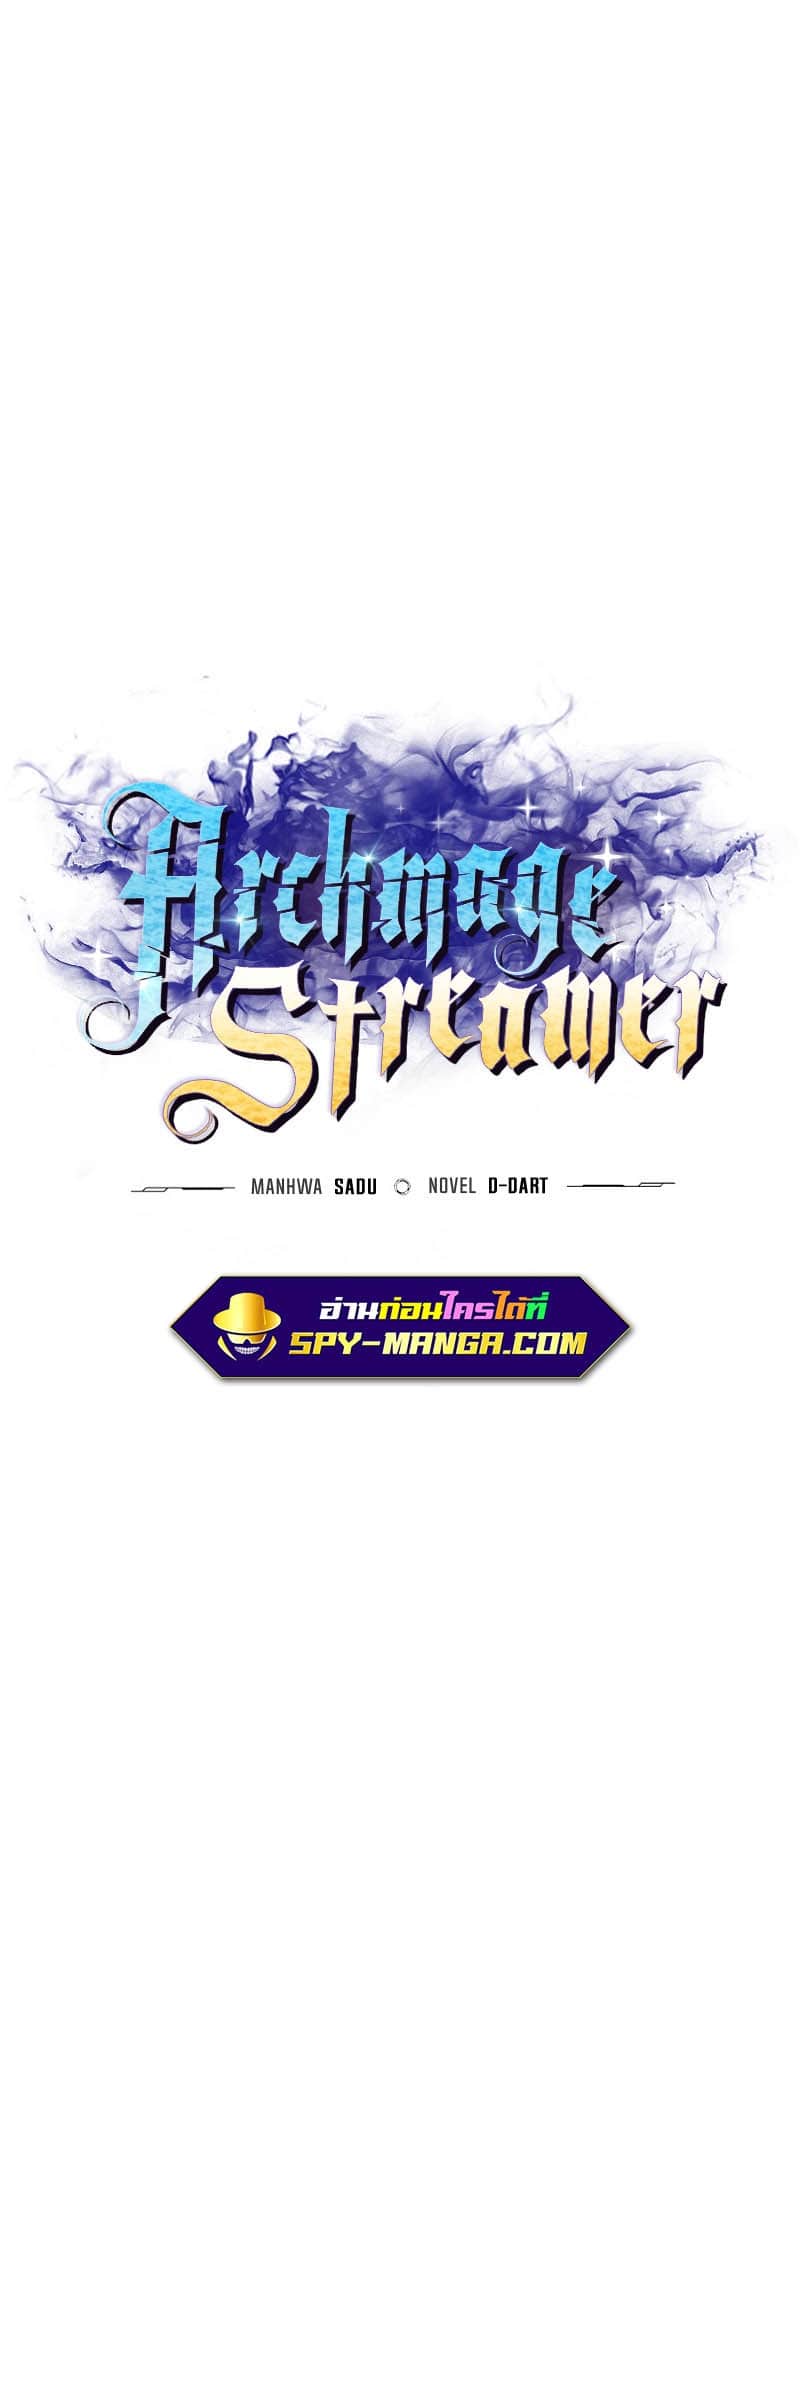 Archmage Streamer 74 07